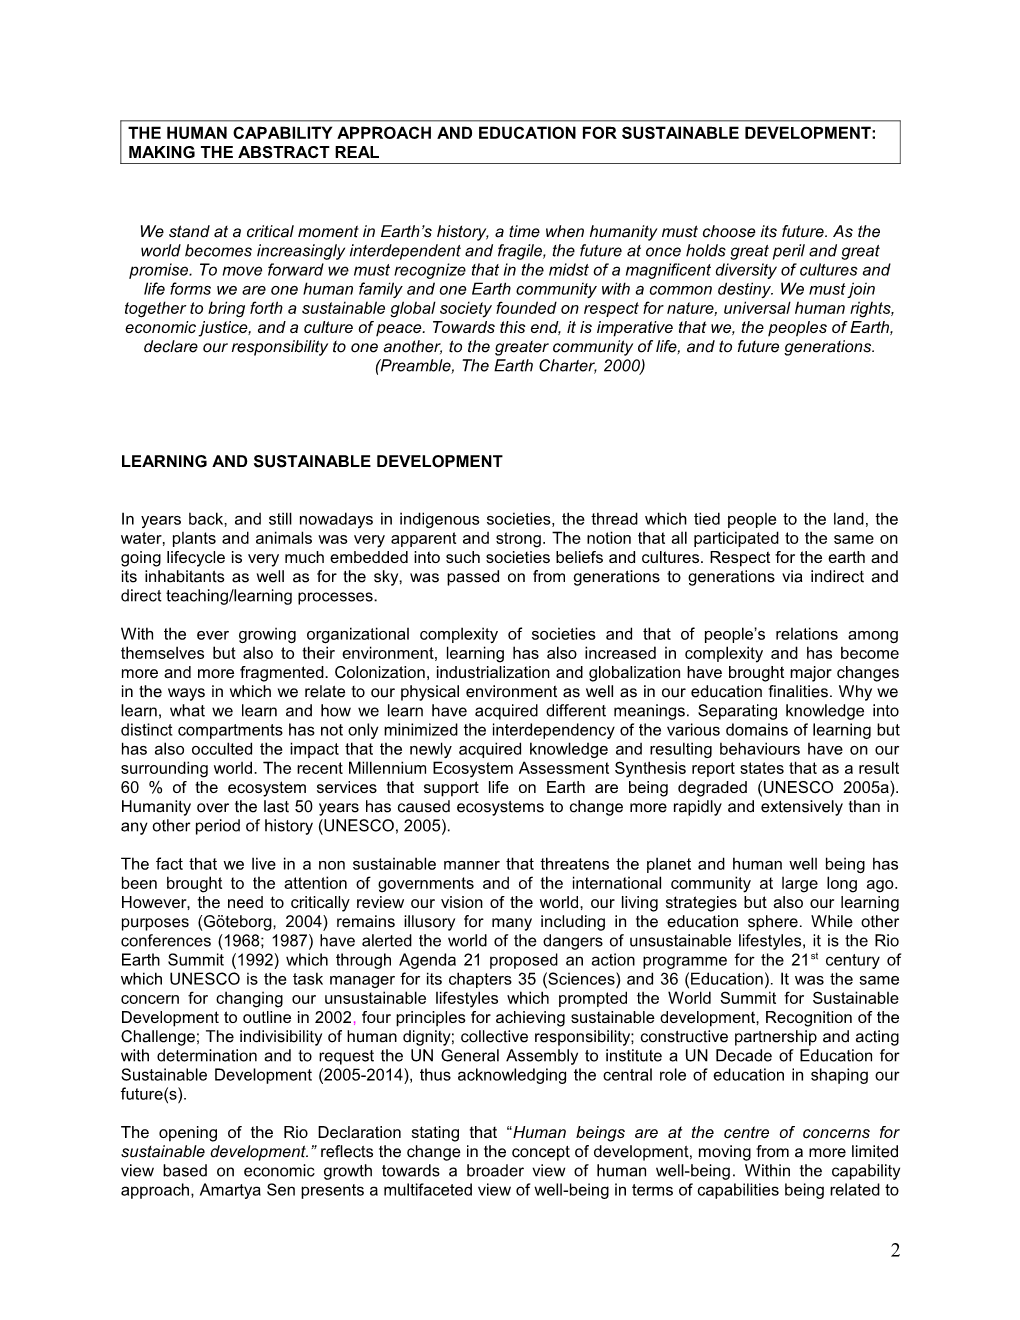 The Human Capability Approach And Education For Sustainable Development: Making The Abstract Real